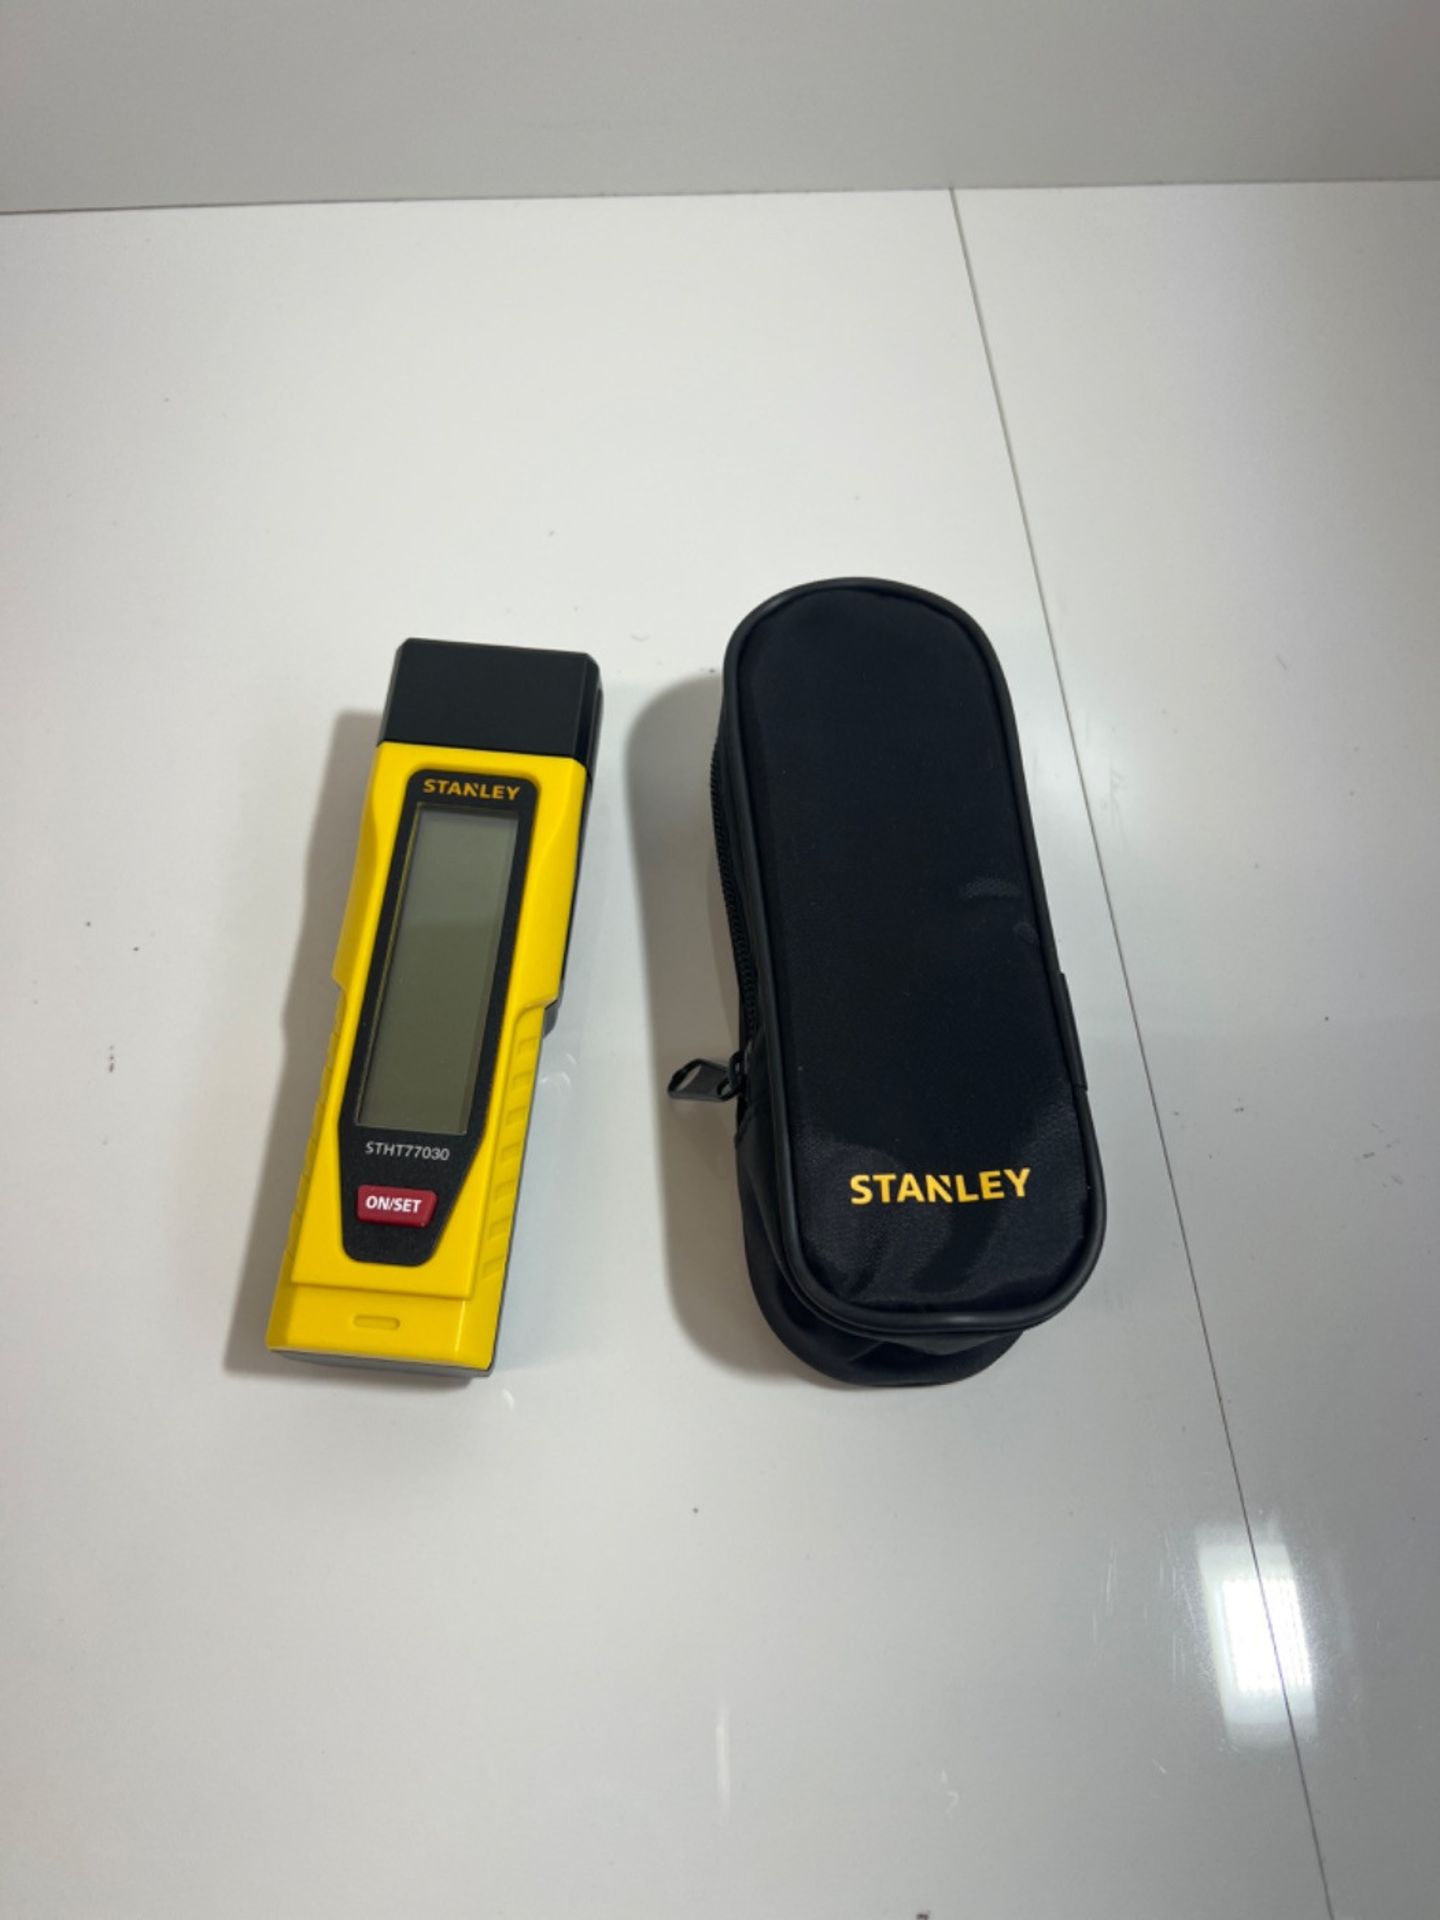 STANLEY Moisture Meter with Two Detection Pins and LCD Screen Includes 4 x AAA Batteries 0-77-030 - Image 2 of 3